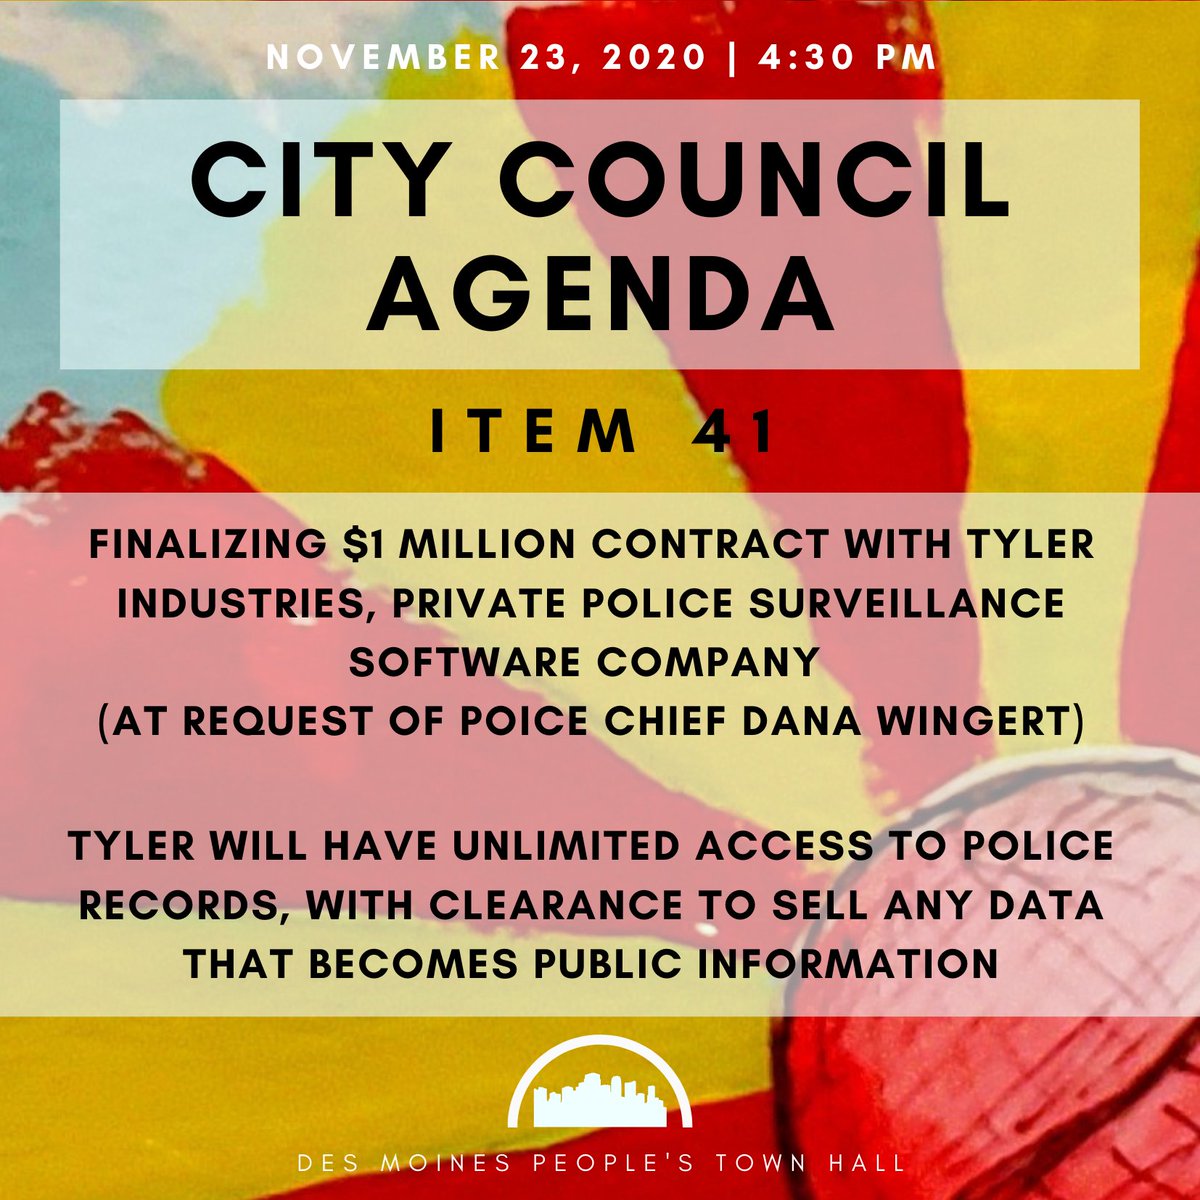 Still consent: In September, Council approved a contract with Tyler Industries for ~$1 millon. Here they are just finalizing terms of a contract.From here on out, the City Manager has complete control over terms of the contract, as long as the financial amount does not change.